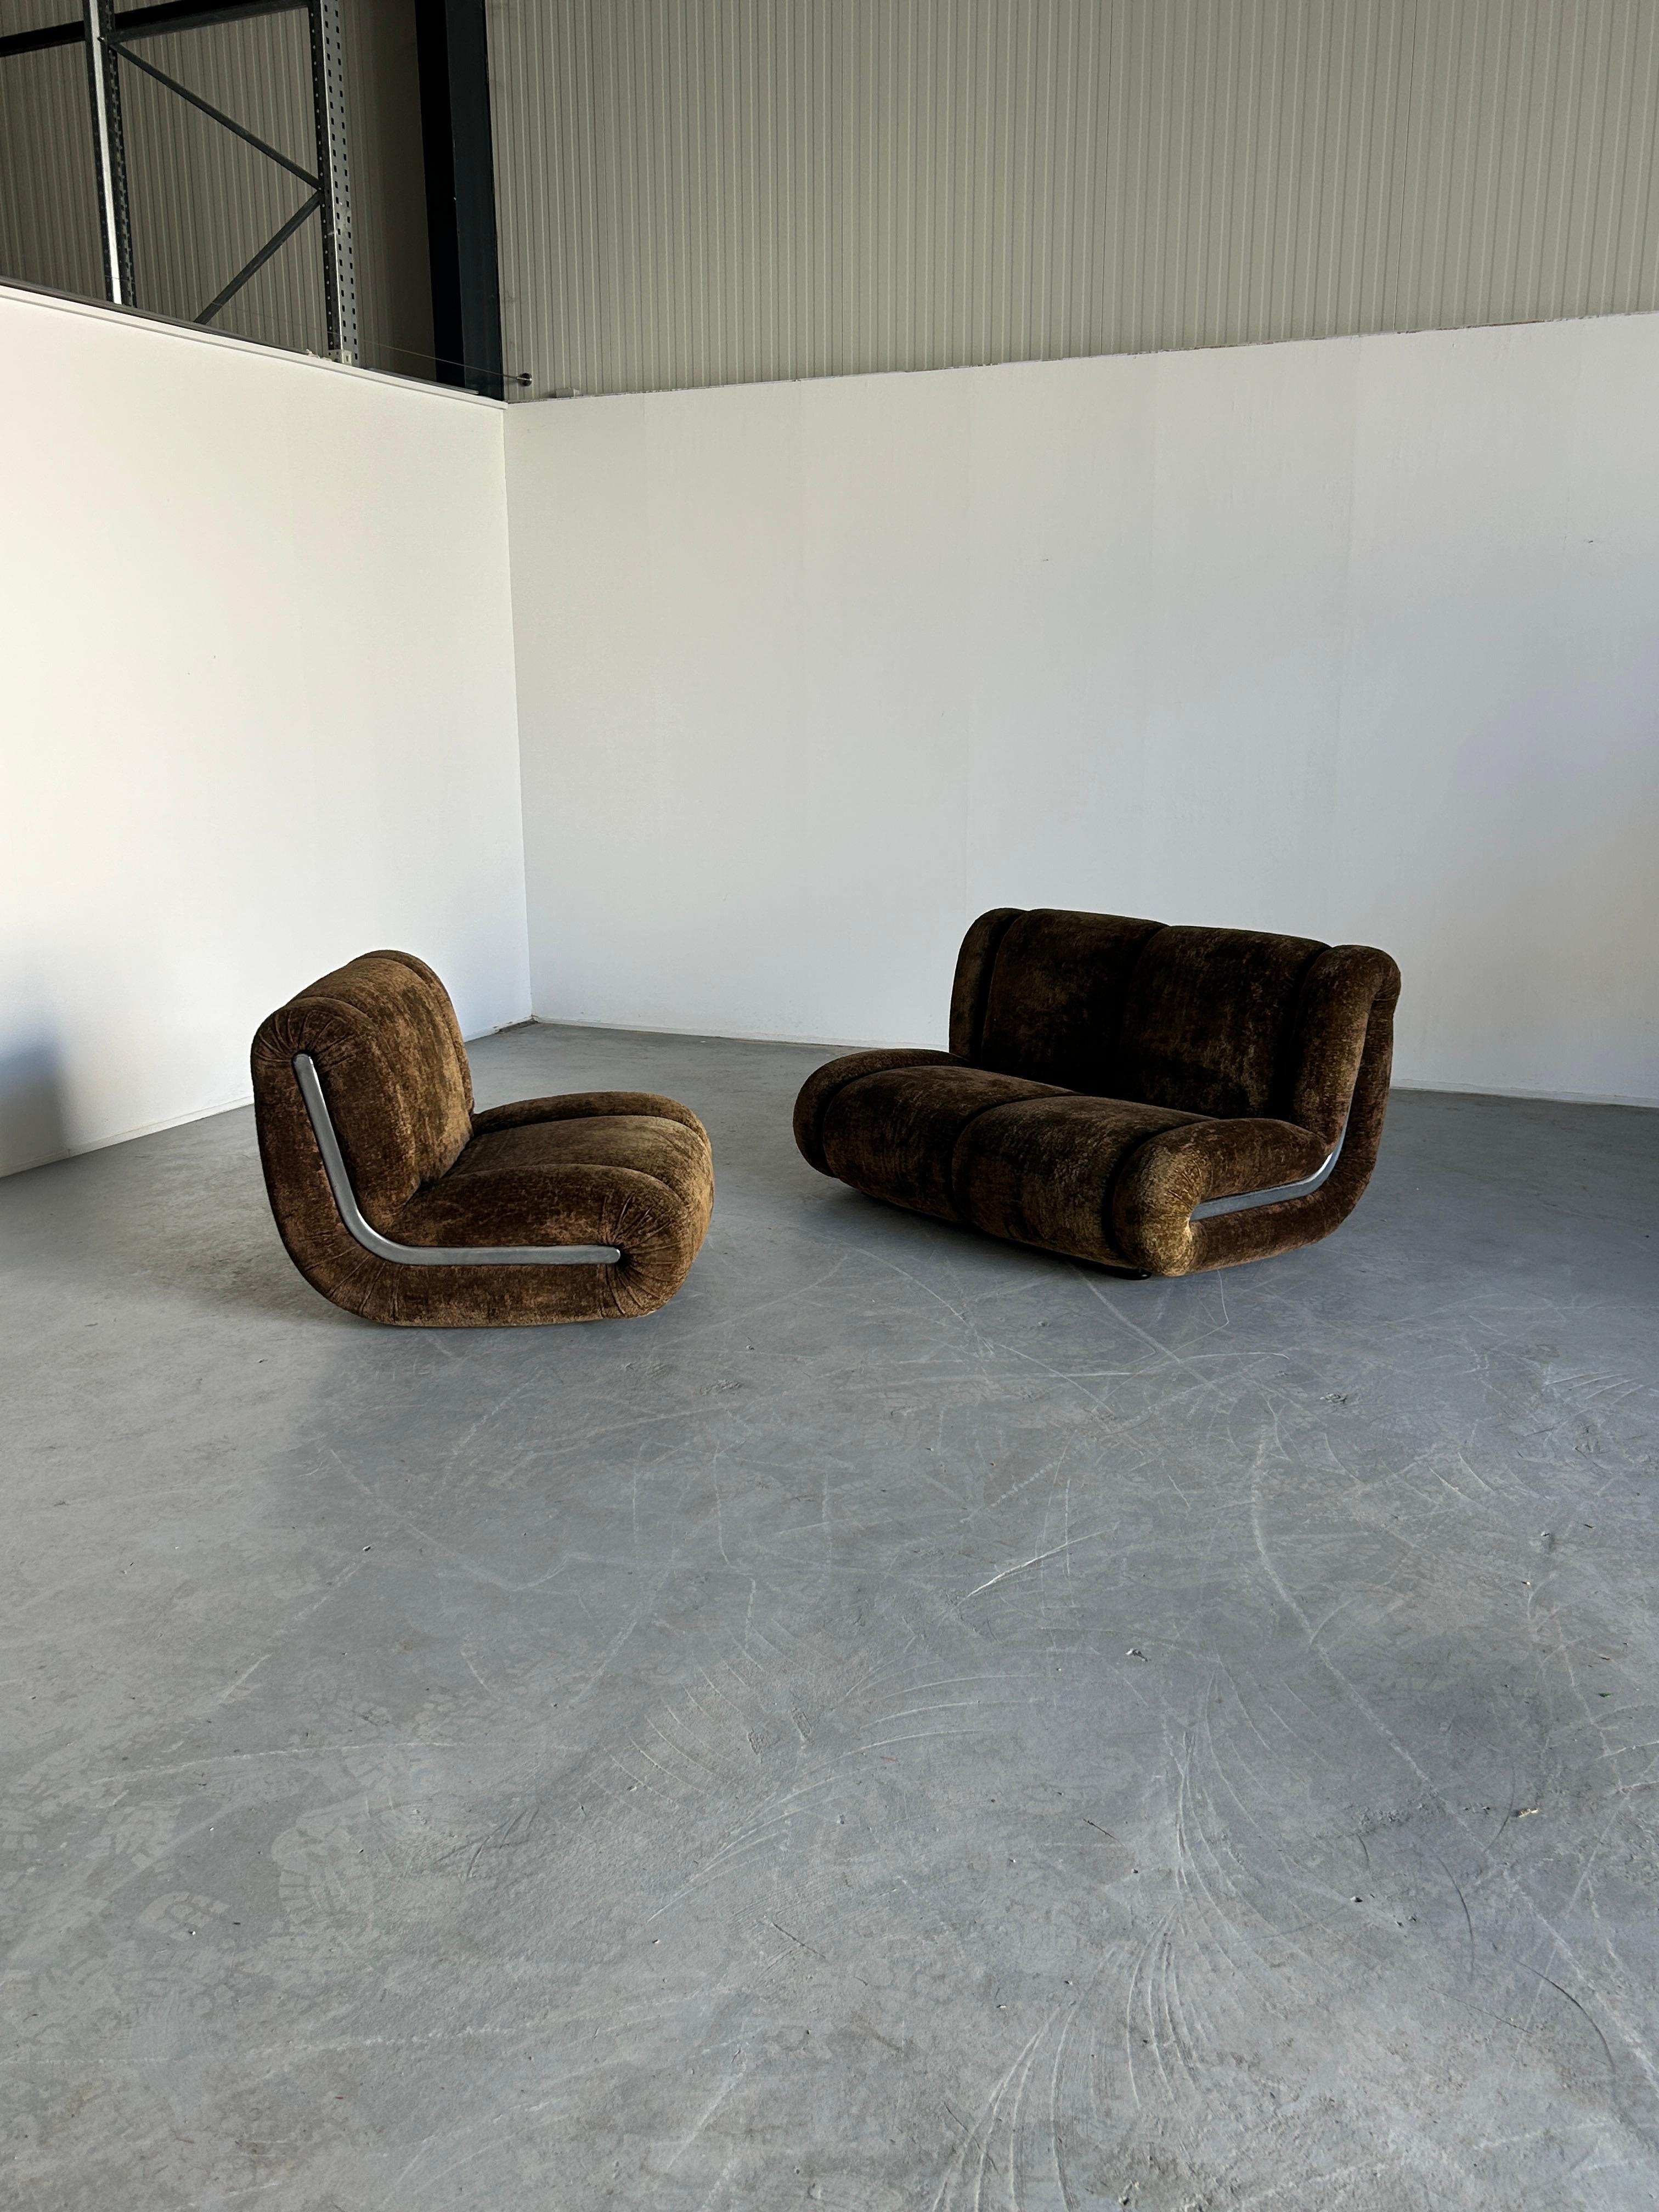 A beautiful two-part Mid-Century-Modern modular seating set, attributed to Claudio Vagnoni for 1P Italy.
Late 1960s production.
Foam and metal construction, thick velvet upholstery.

In excellent vintage condition with minimal expected signs of age,